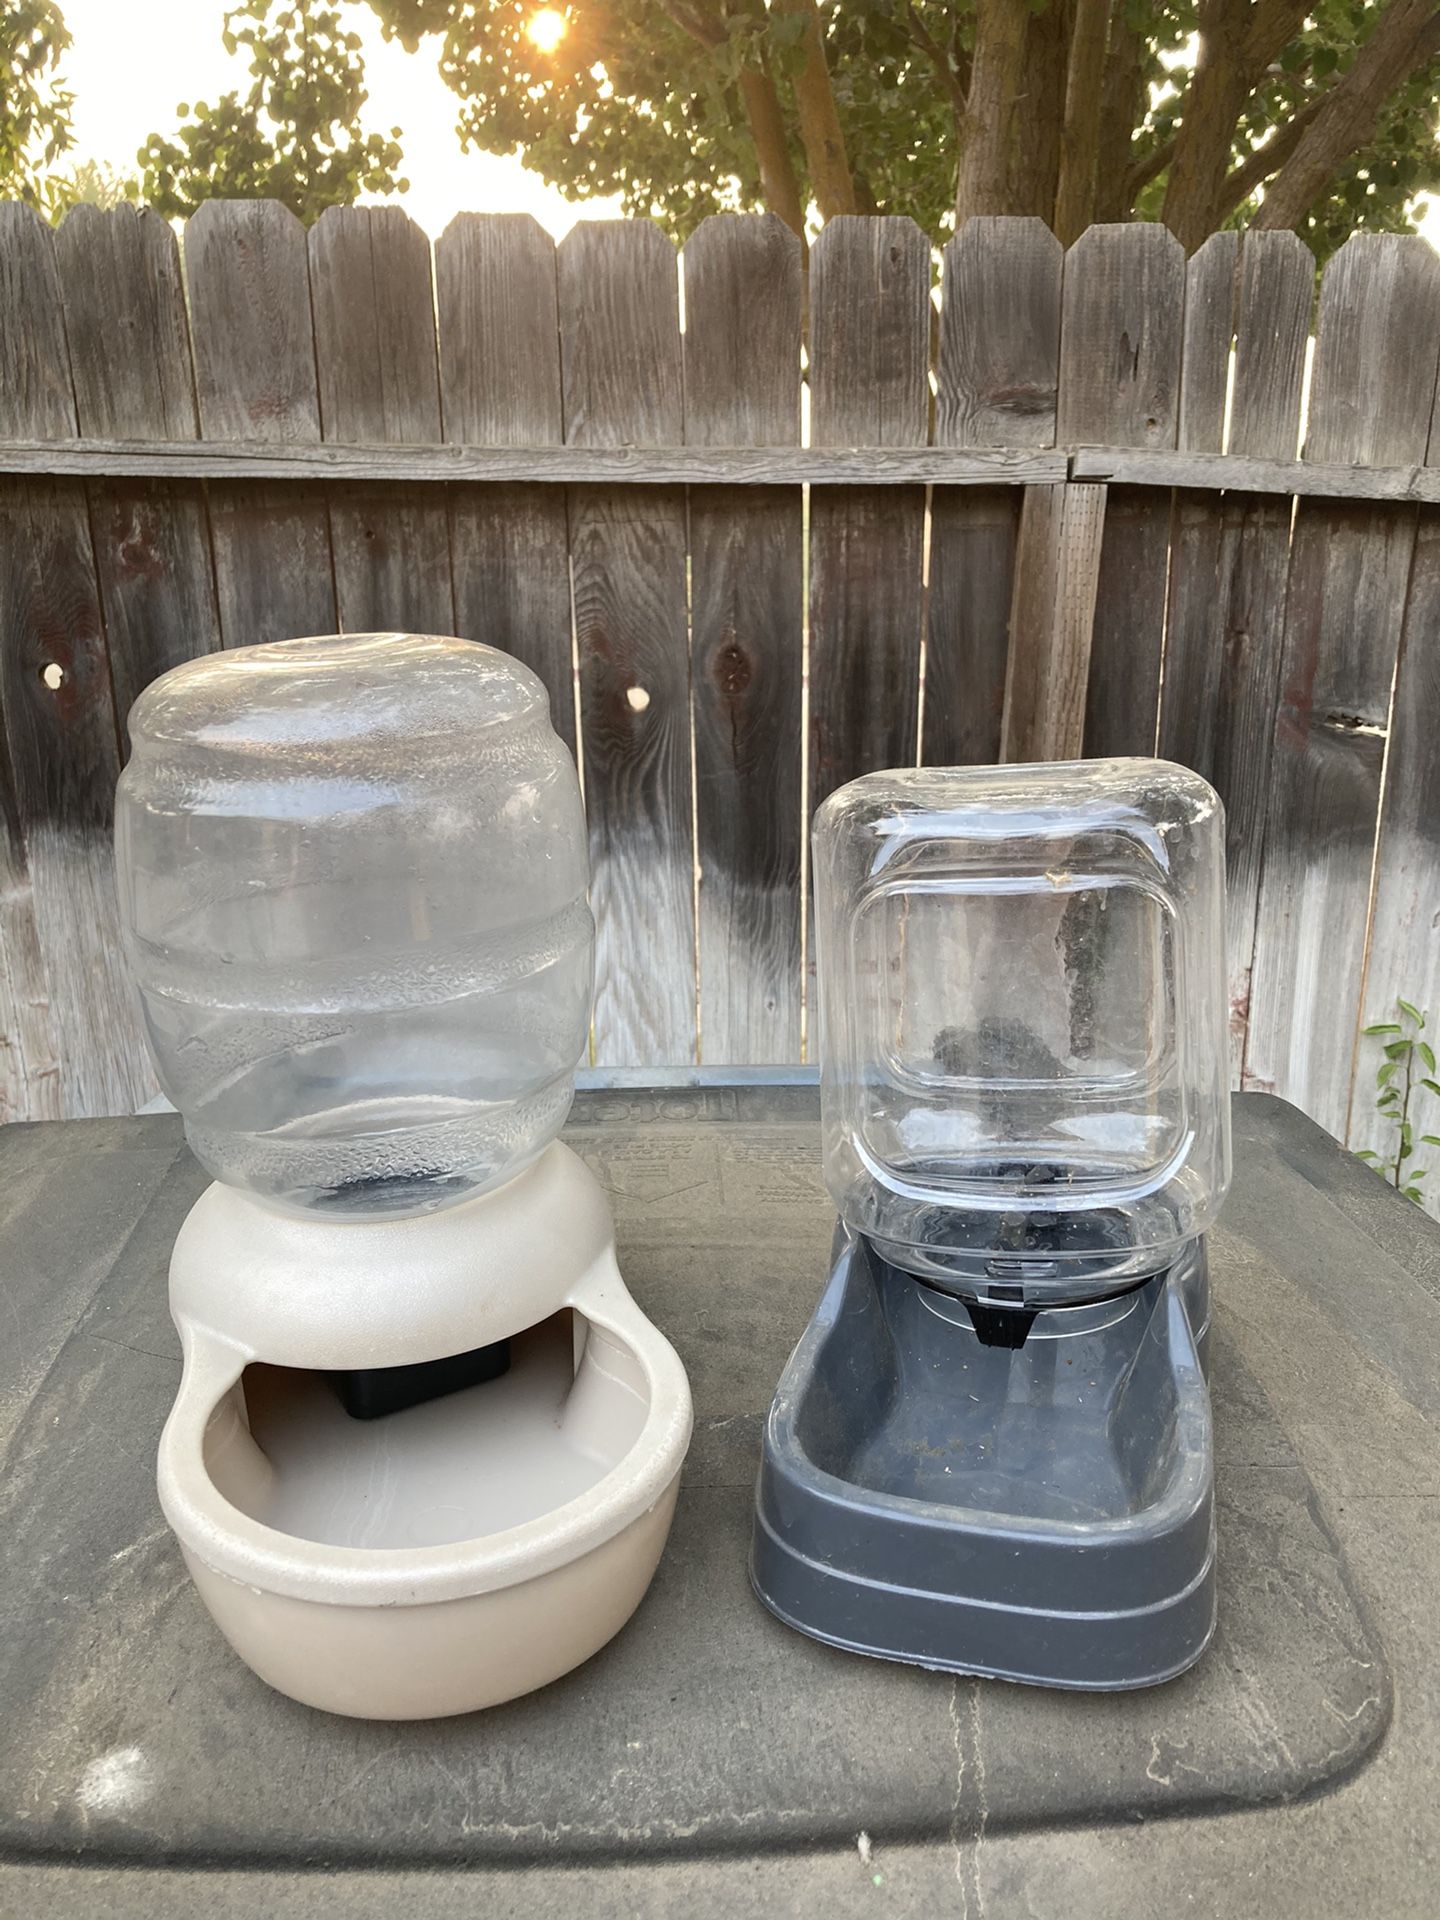 Pet food bowl and water bowl with filter